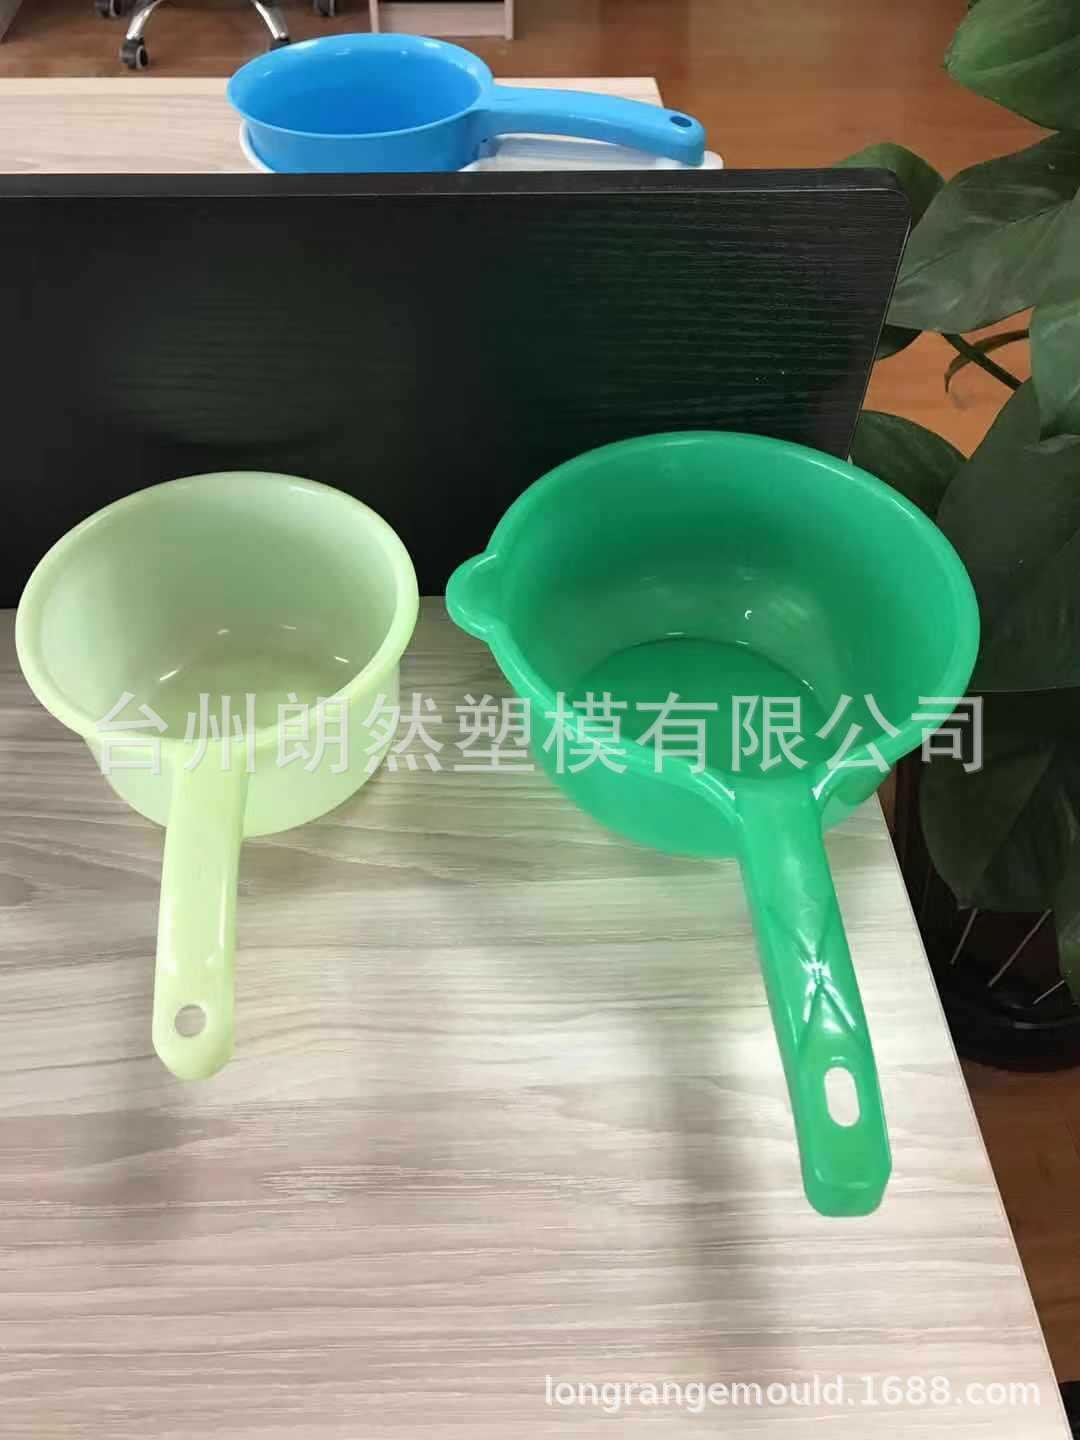 Longrange factory customized processing high precision plastic water spoon mold 2